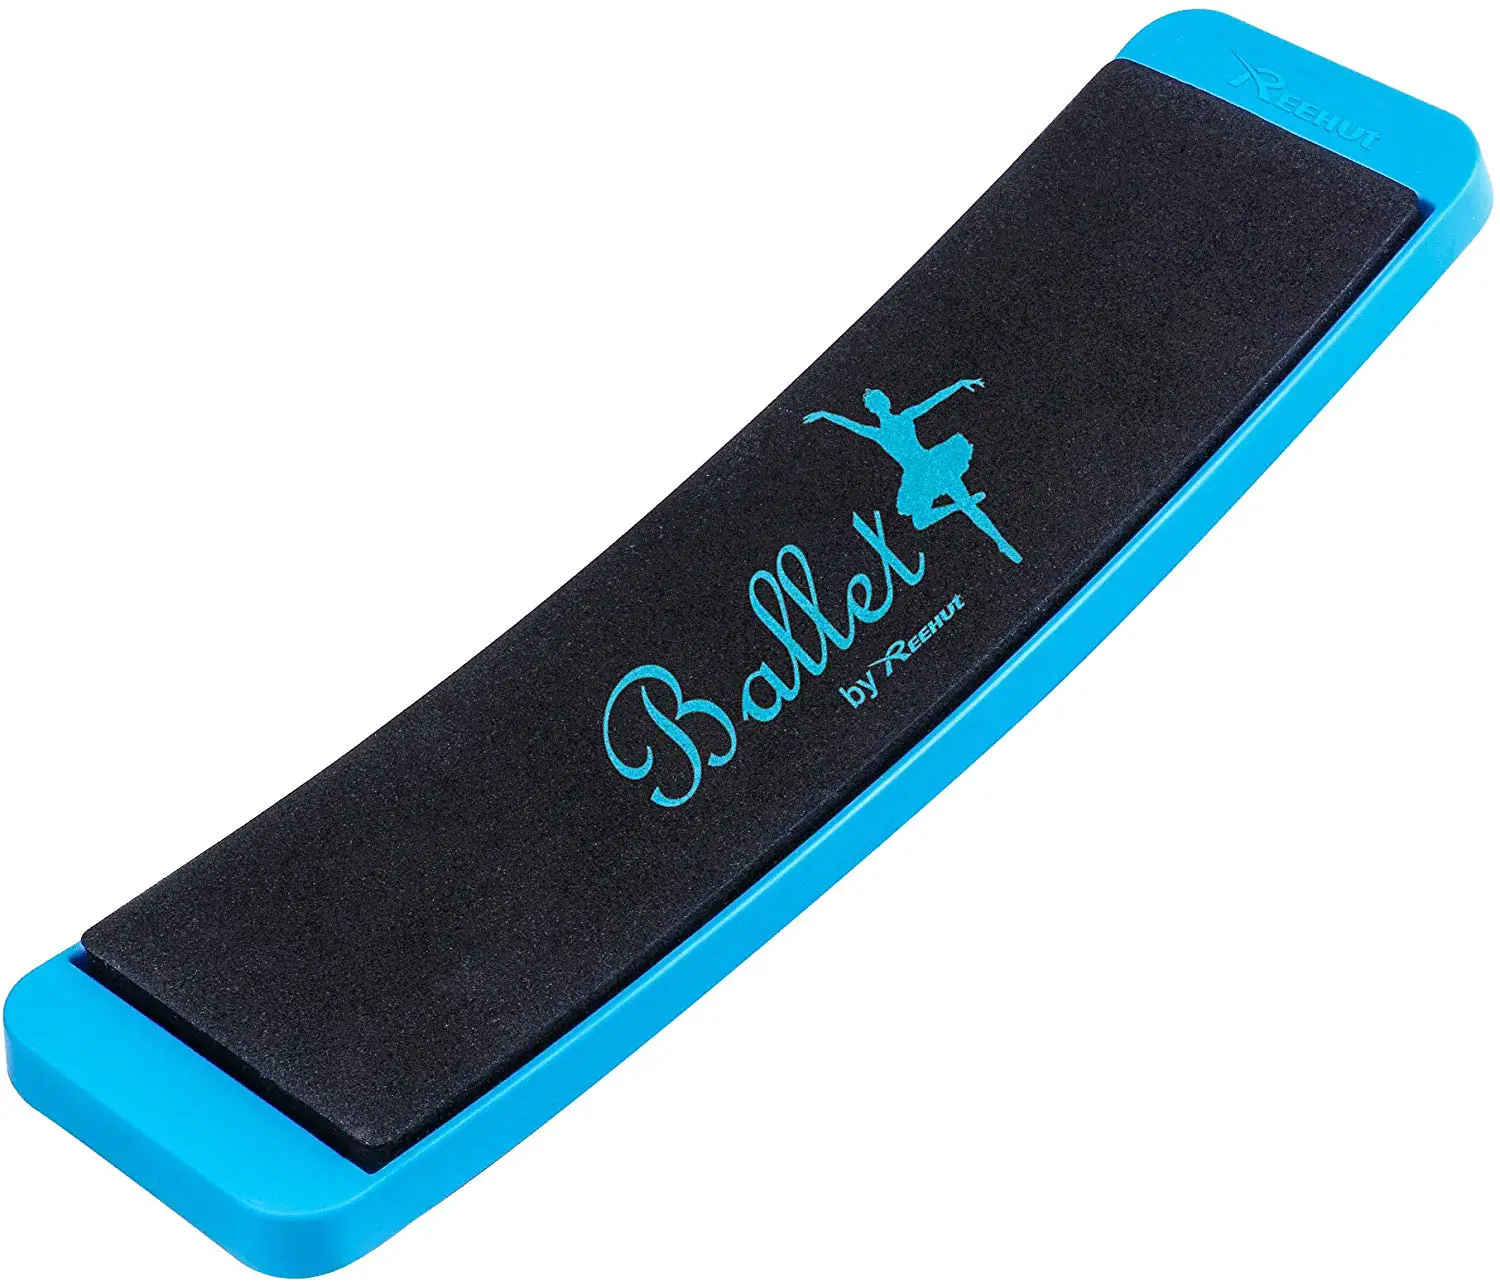 Gymnastics and Figure Skating Releve Balance Turn Board for Ballet Fragraim Pro Ballet Turning Disc Turns and Dance Spinning Spin Boards for Better Pirouette Technique Dancers